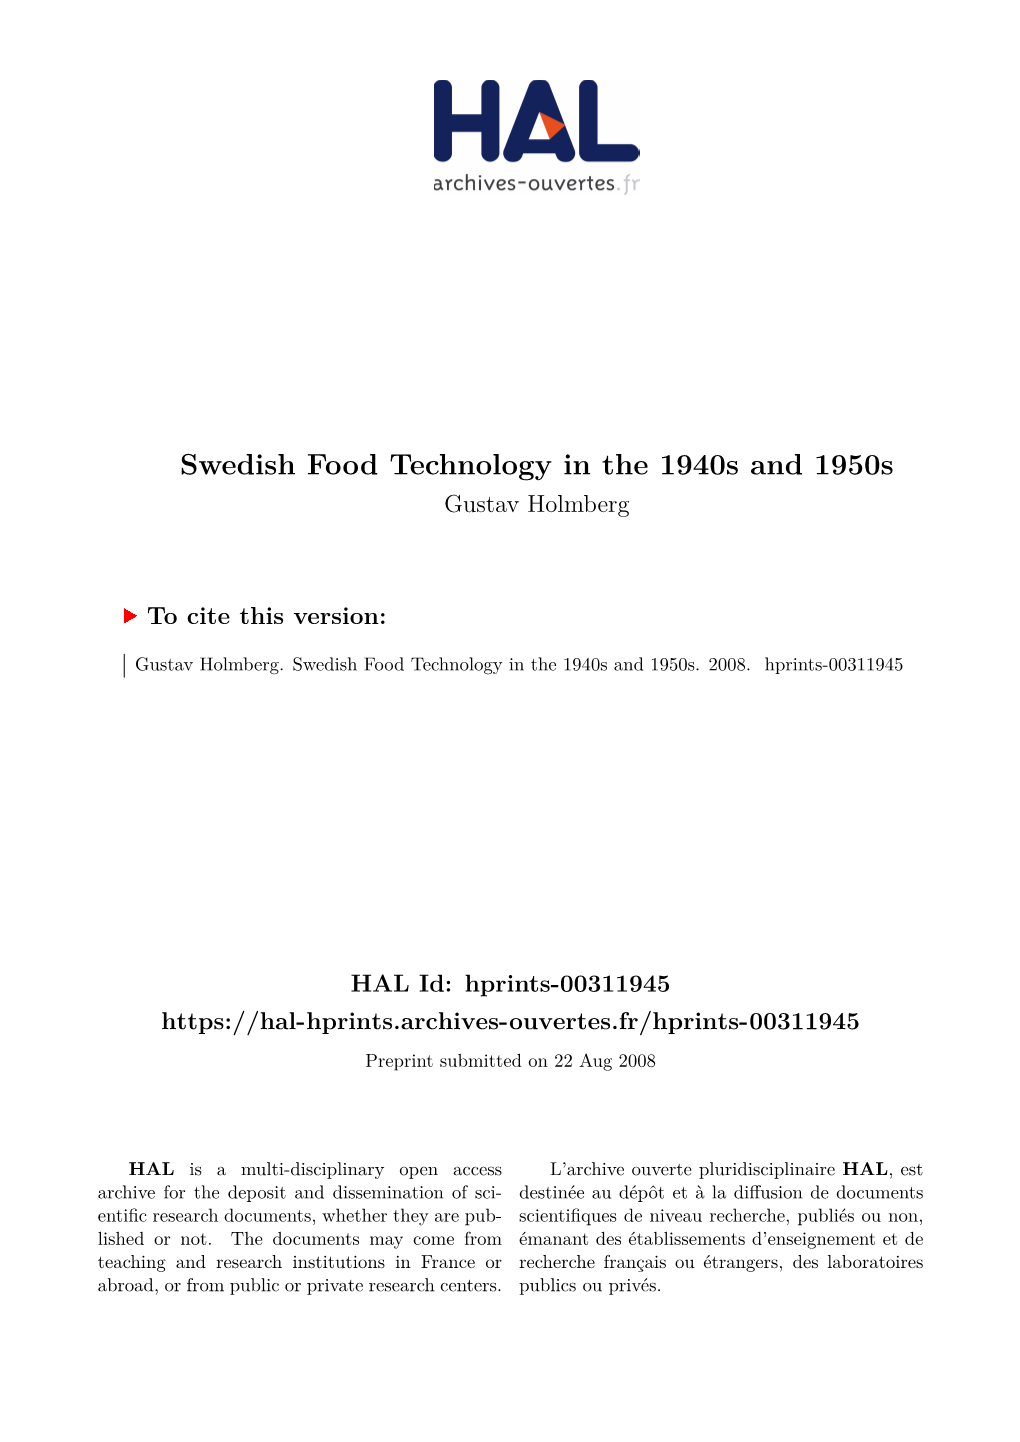 Swedish Food Technology in the 1940S and 1950S Gustav Holmberg